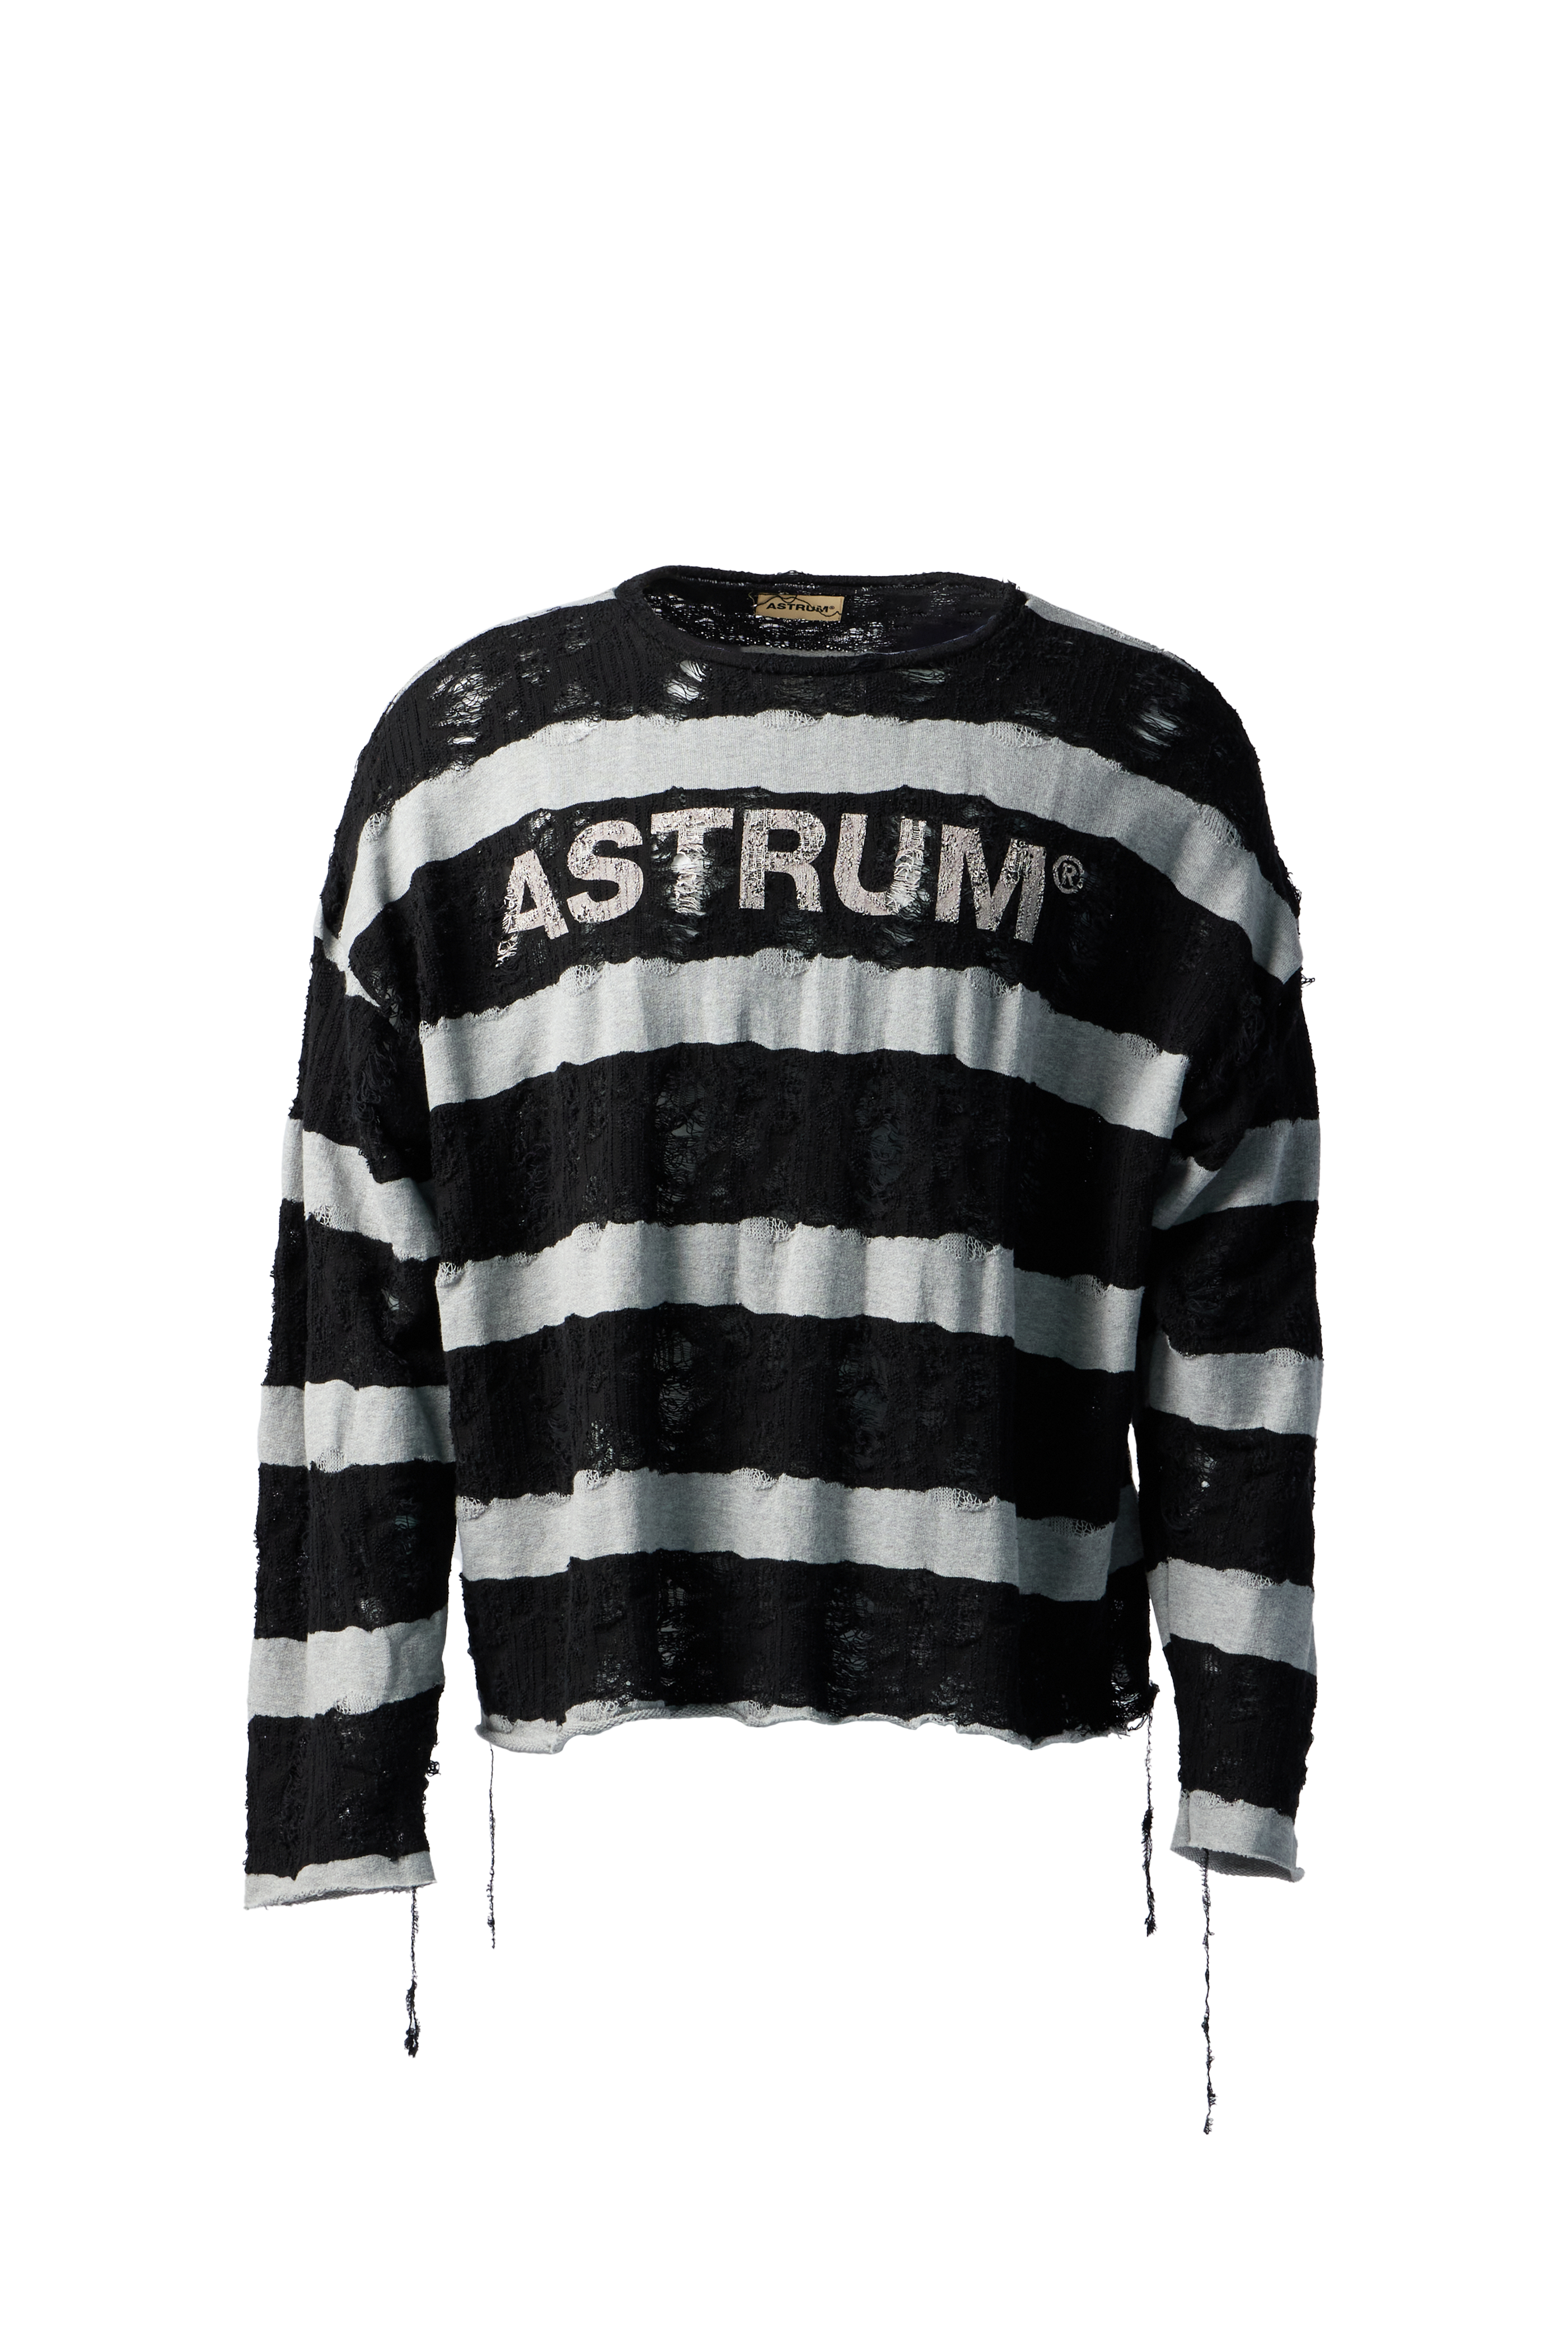 ASTRUM - Allure Knit product image